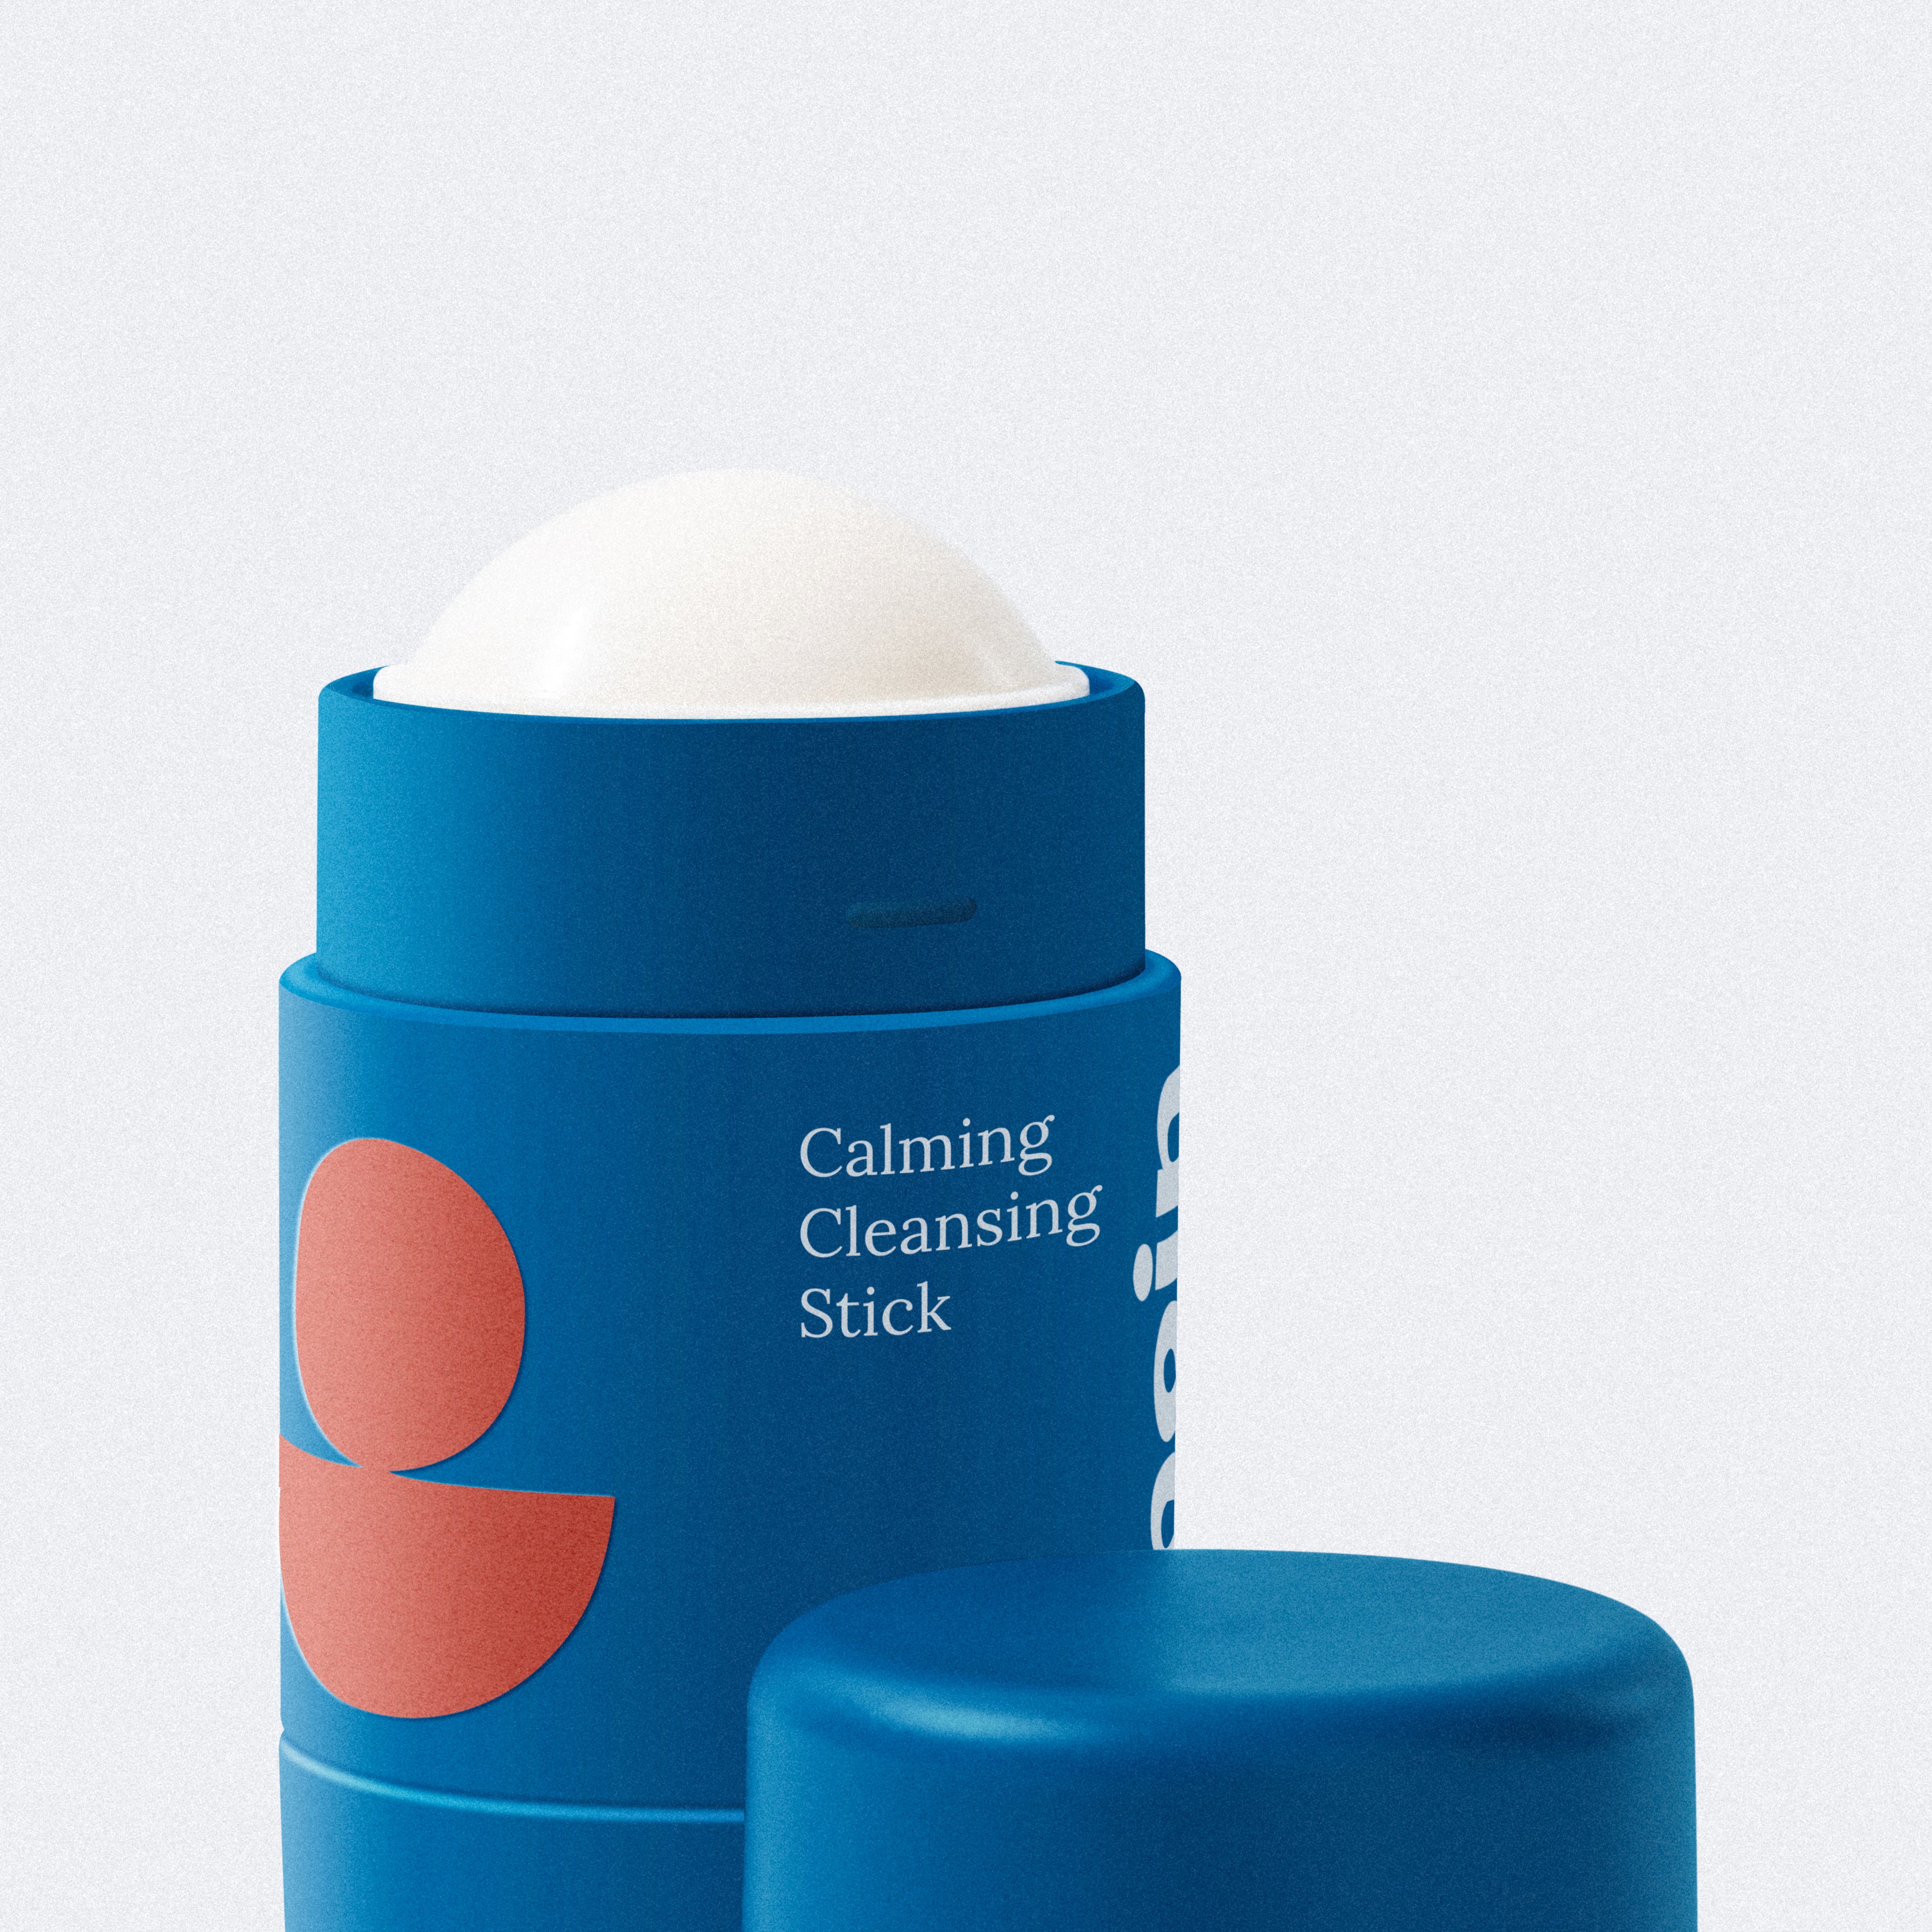 Calming Cleansing Stick